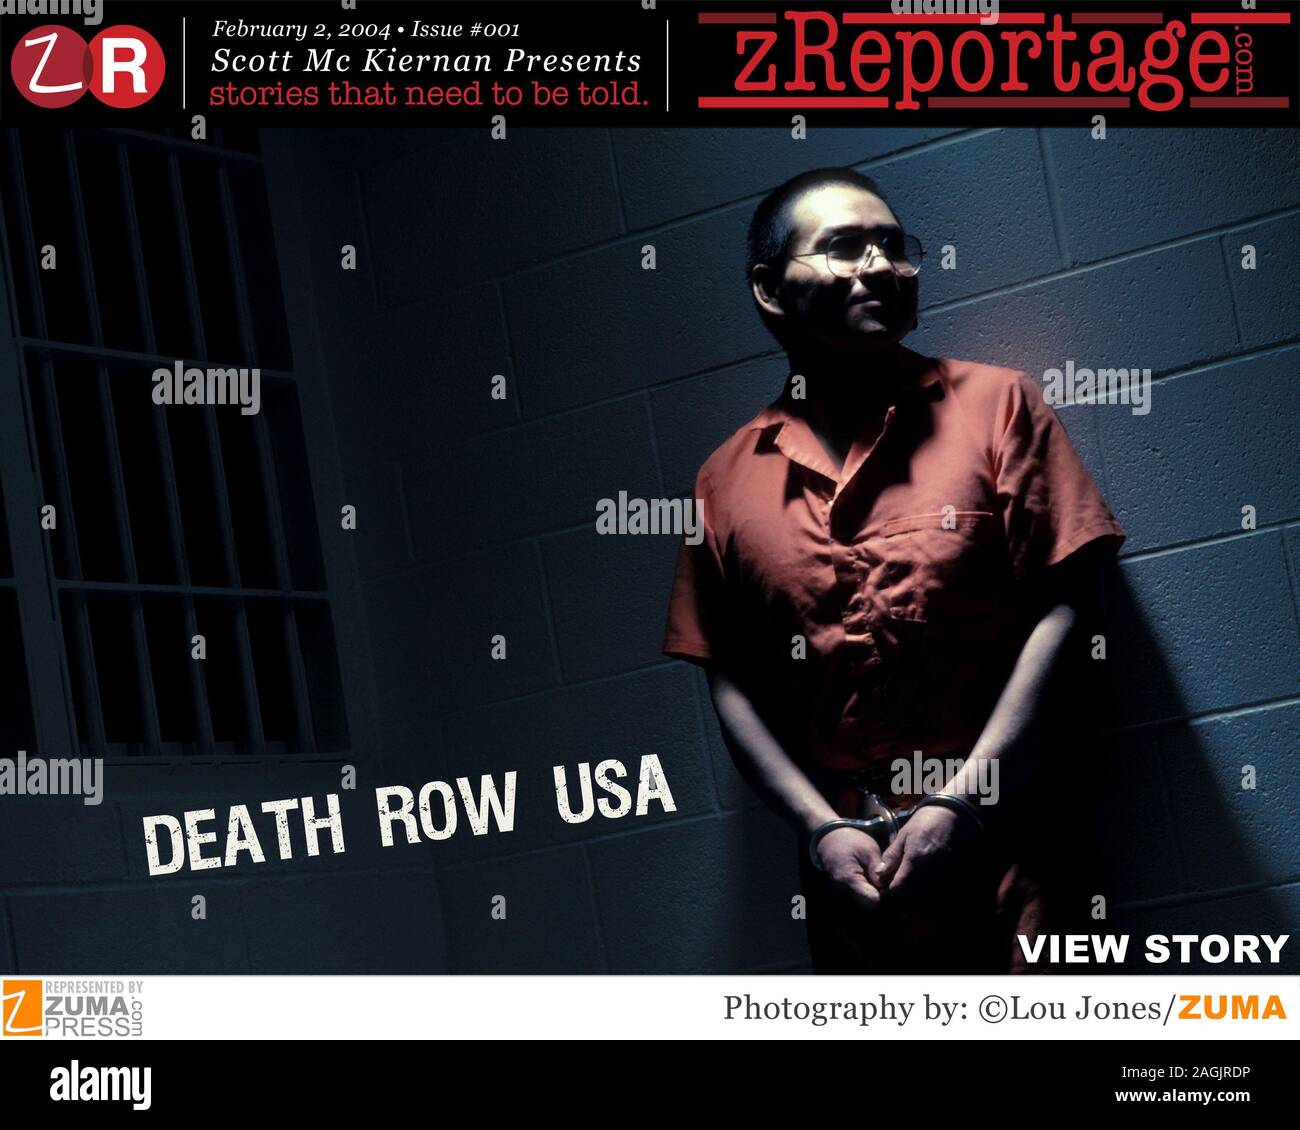 zReportage.com Story of the Week #001: Launched February 2, 2004: Full multimedia experience: audio, stills, text and or video: Go to http://www.zReportage.com to see more - Photojournalist Lou Jones spent six years researching and documenting the odyssey of men and women on America's death rows. Lou was the first photojournalist to gain access to so many death-row inmates, unshackled without glass or wire-mesh barriers. In 1997, he published an insightful and touching book, Final Exposure: Portraits from Death Row, which is currently in its second edition. The images from that book are presen Stock Photo